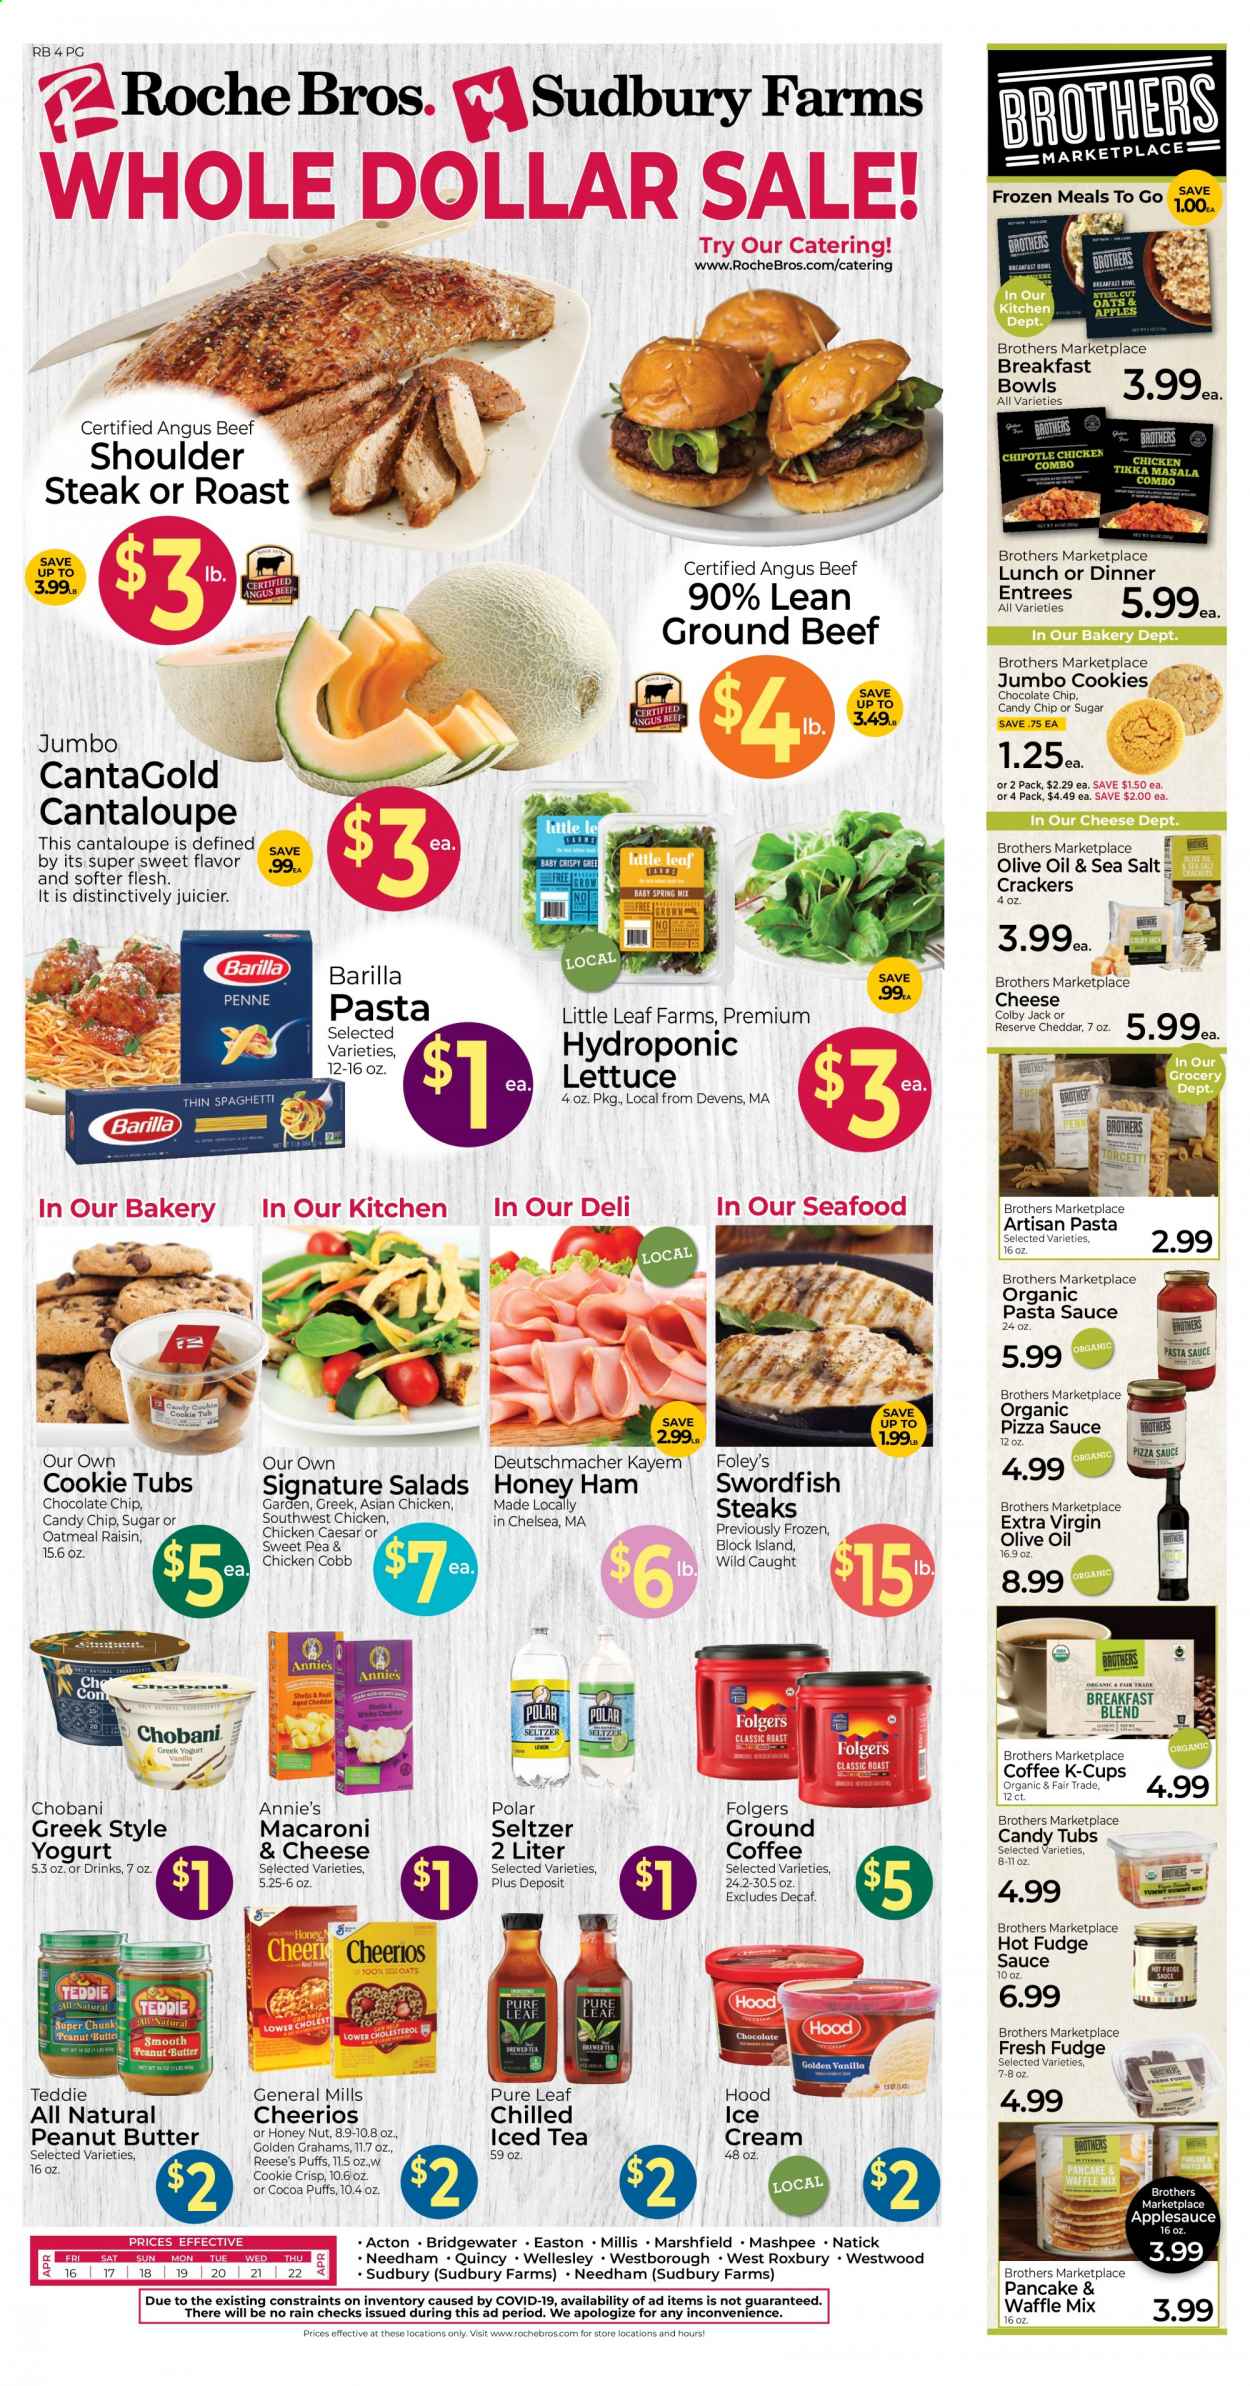 thumbnail - Roche Bros. Flyer - 04/16/2021 - 04/22/2021 - Sales products - puffs, cantaloupe, swordfish, seafood, macaroni & cheese, spaghetti, pizza, pasta sauce, sauce, breakfast bowl, pancakes, Barilla, Tikka Masala, Annie's, ham, Colby cheese, yoghurt, Chobani, ice cream, Reese's, cookies, chocolate chips, crackers, sugar, oatmeal, Cheerios, penne, extra virgin olive oil, olive oil, oil, apple sauce, peanut butter, ice tea, seltzer water, Pure Leaf, coffee, Folgers, ground coffee, coffee capsules, K-Cups, beef meat, ground beef, steak. Page 1.